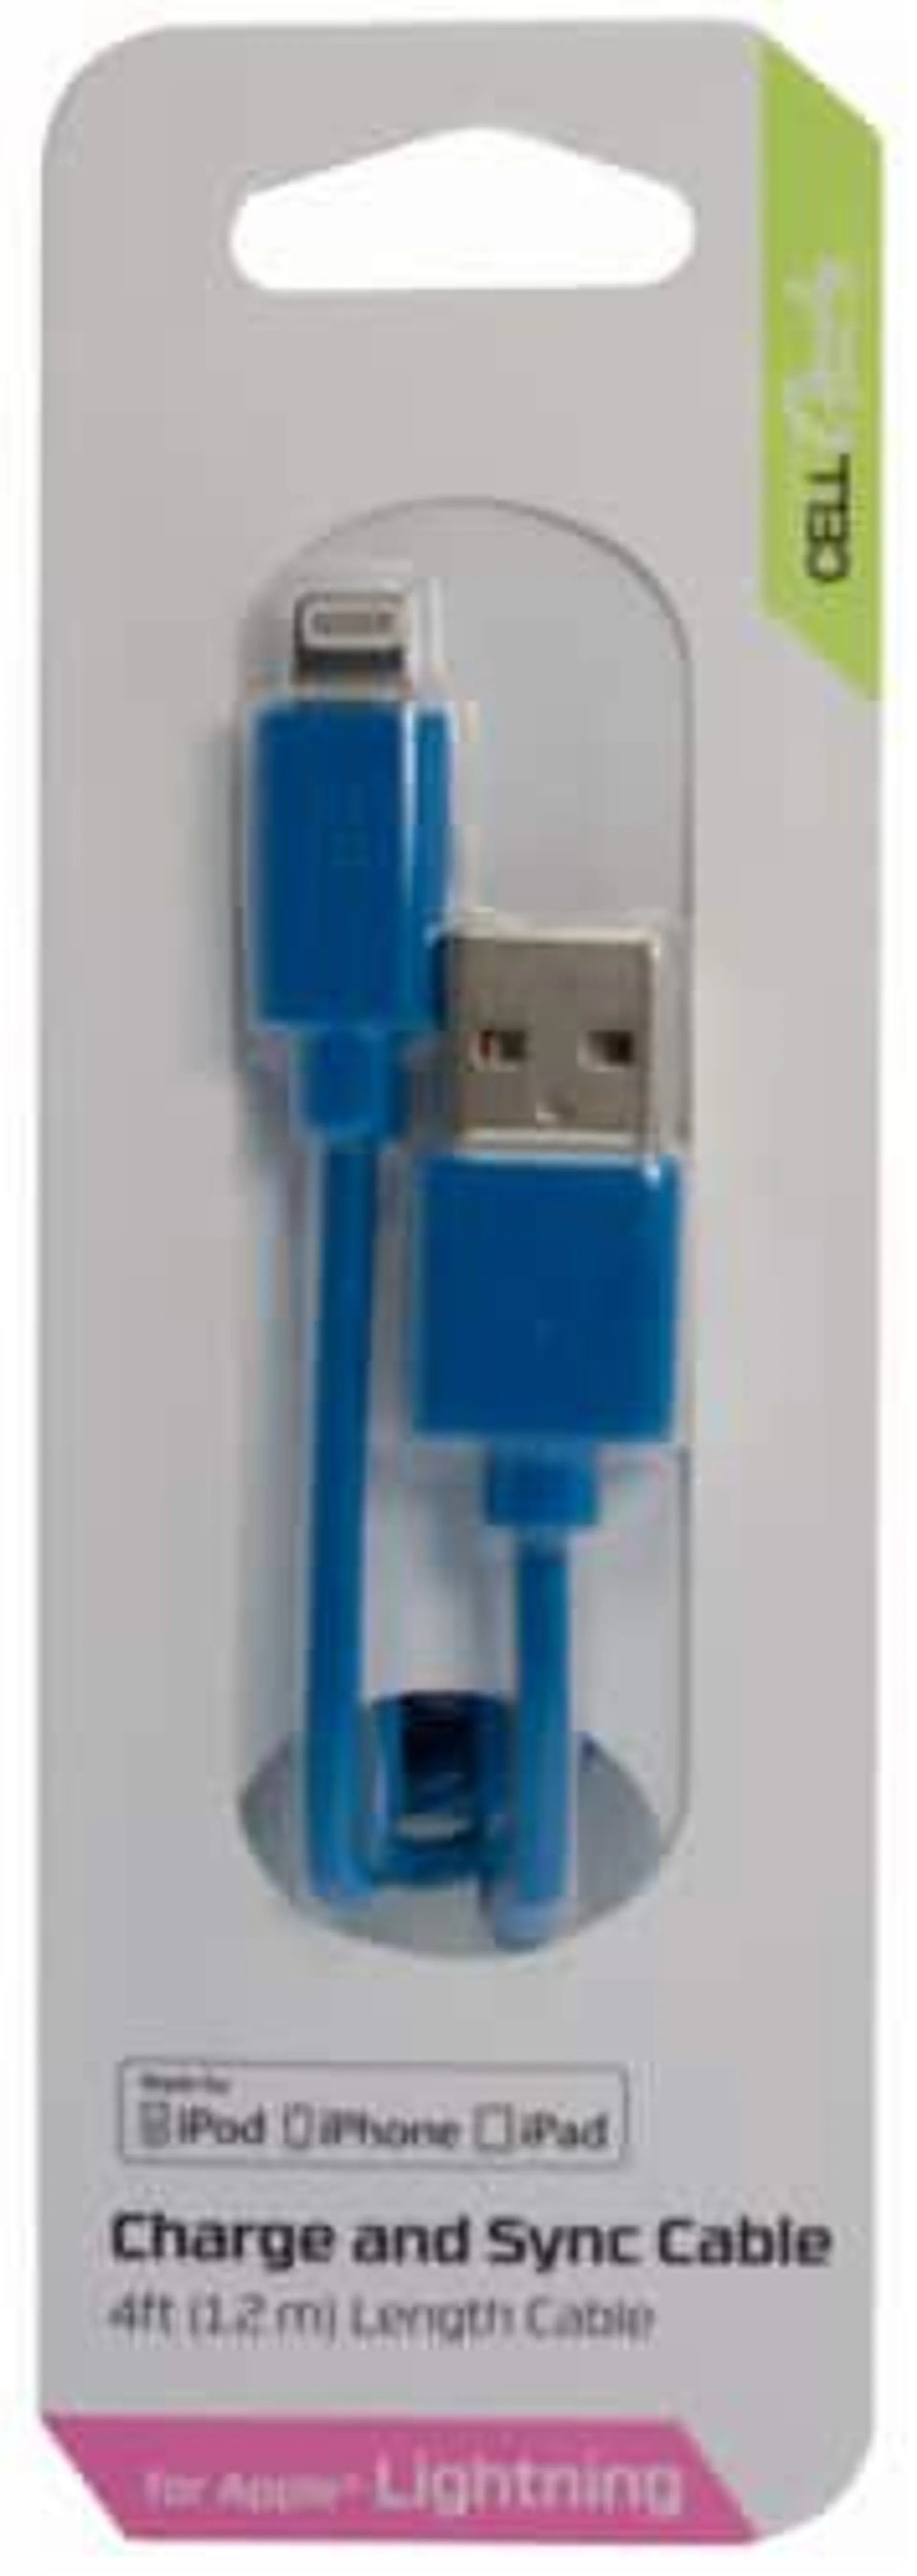 CELLCandy Charge and Sync Cable - Blue